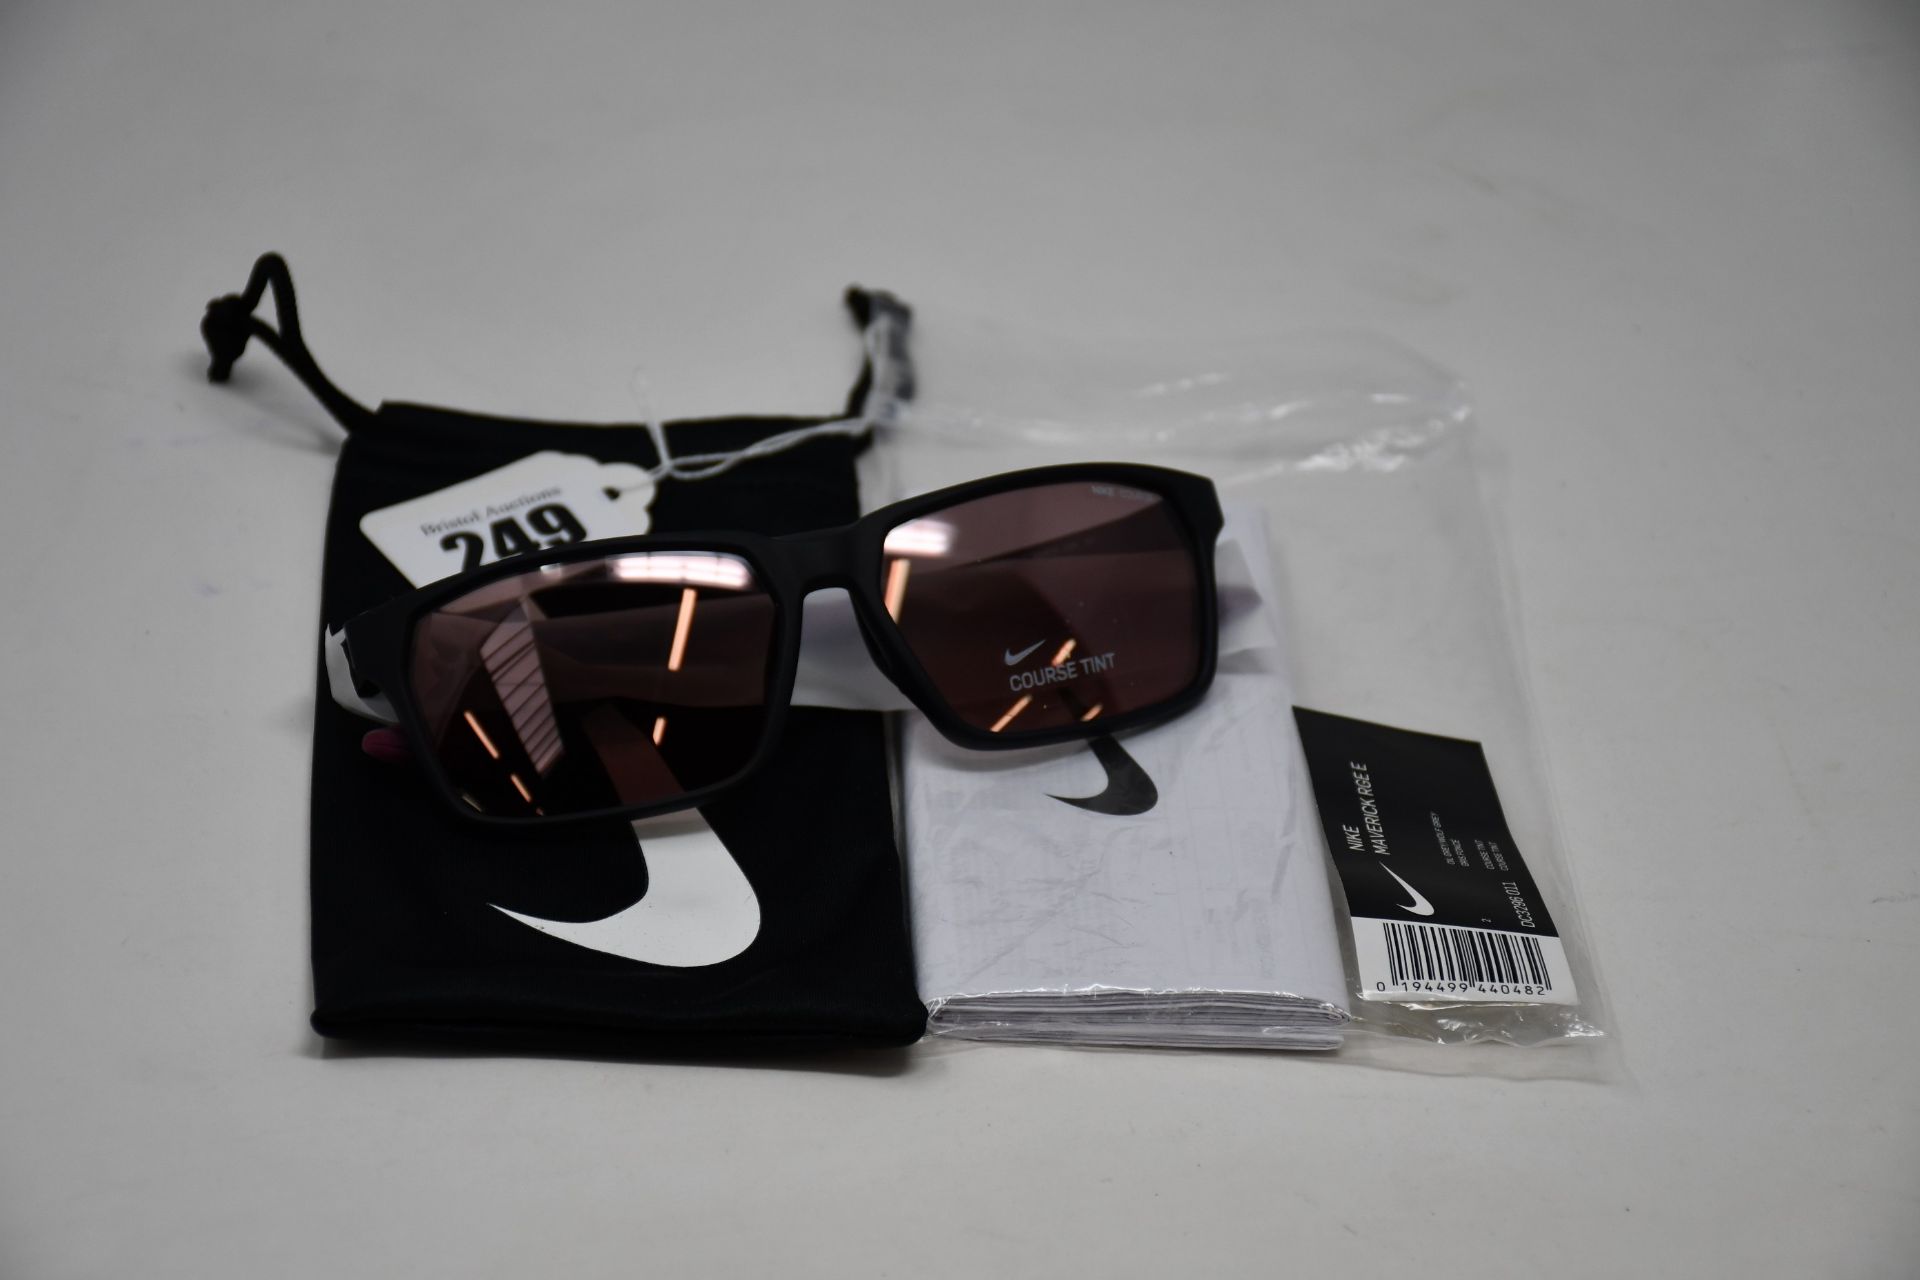 A pair of as new Nike Maverick RGE E sunglasses with protective pouch (RRP £137).